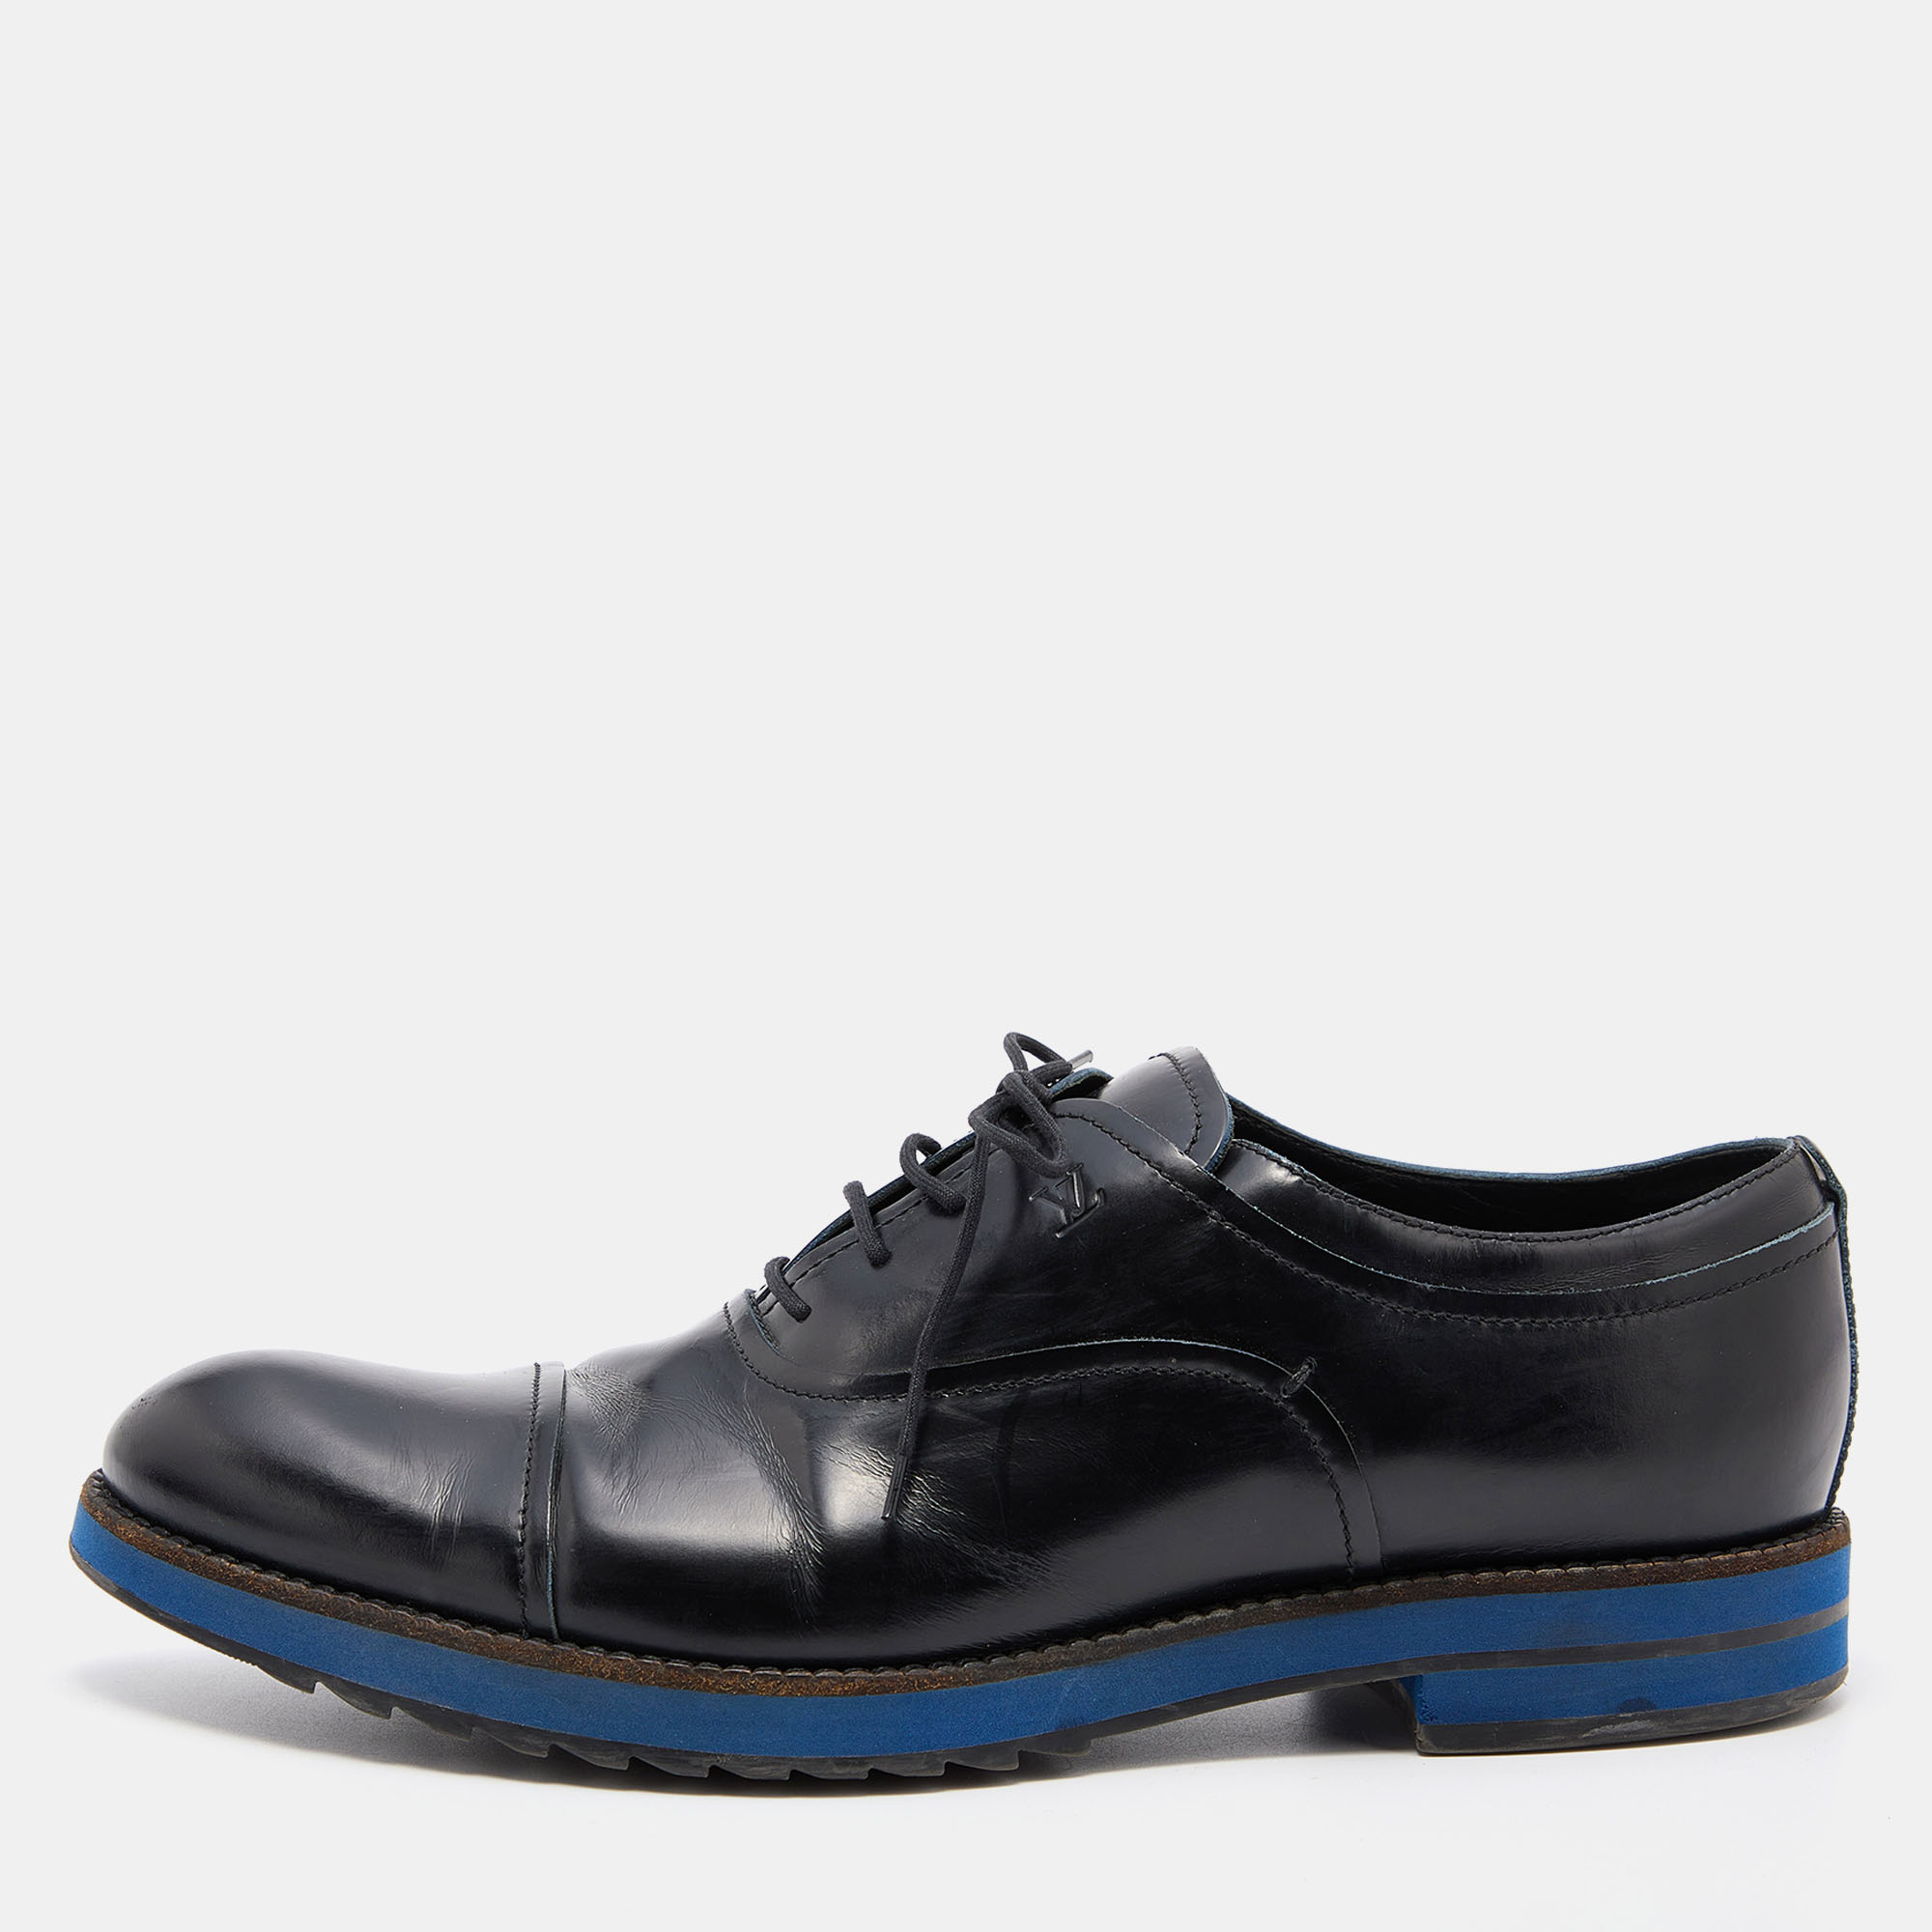 Pre-owned Louis Vuitton Black Leather Lace Up Oxfords Size 42.5